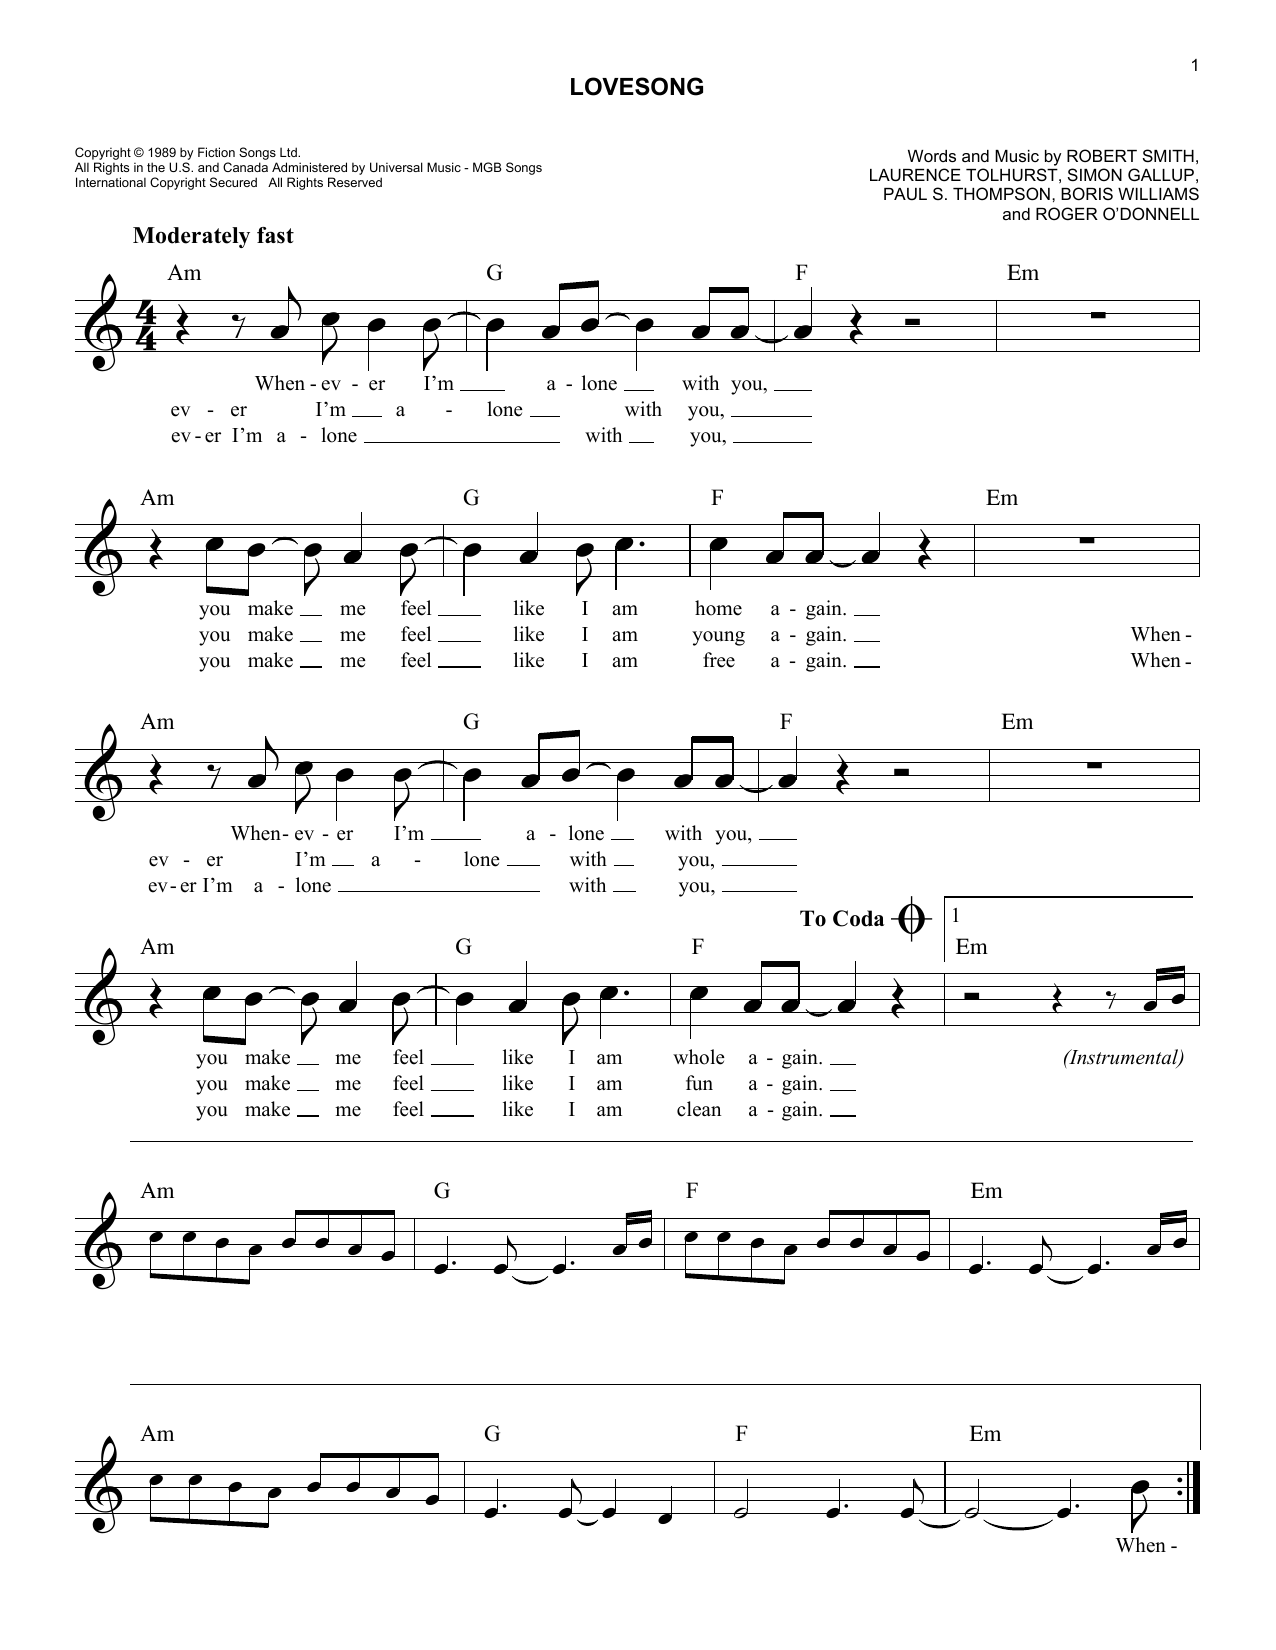 Preview Adele Lovesong Pop sheet music, notes and chords for Melody Line, L...